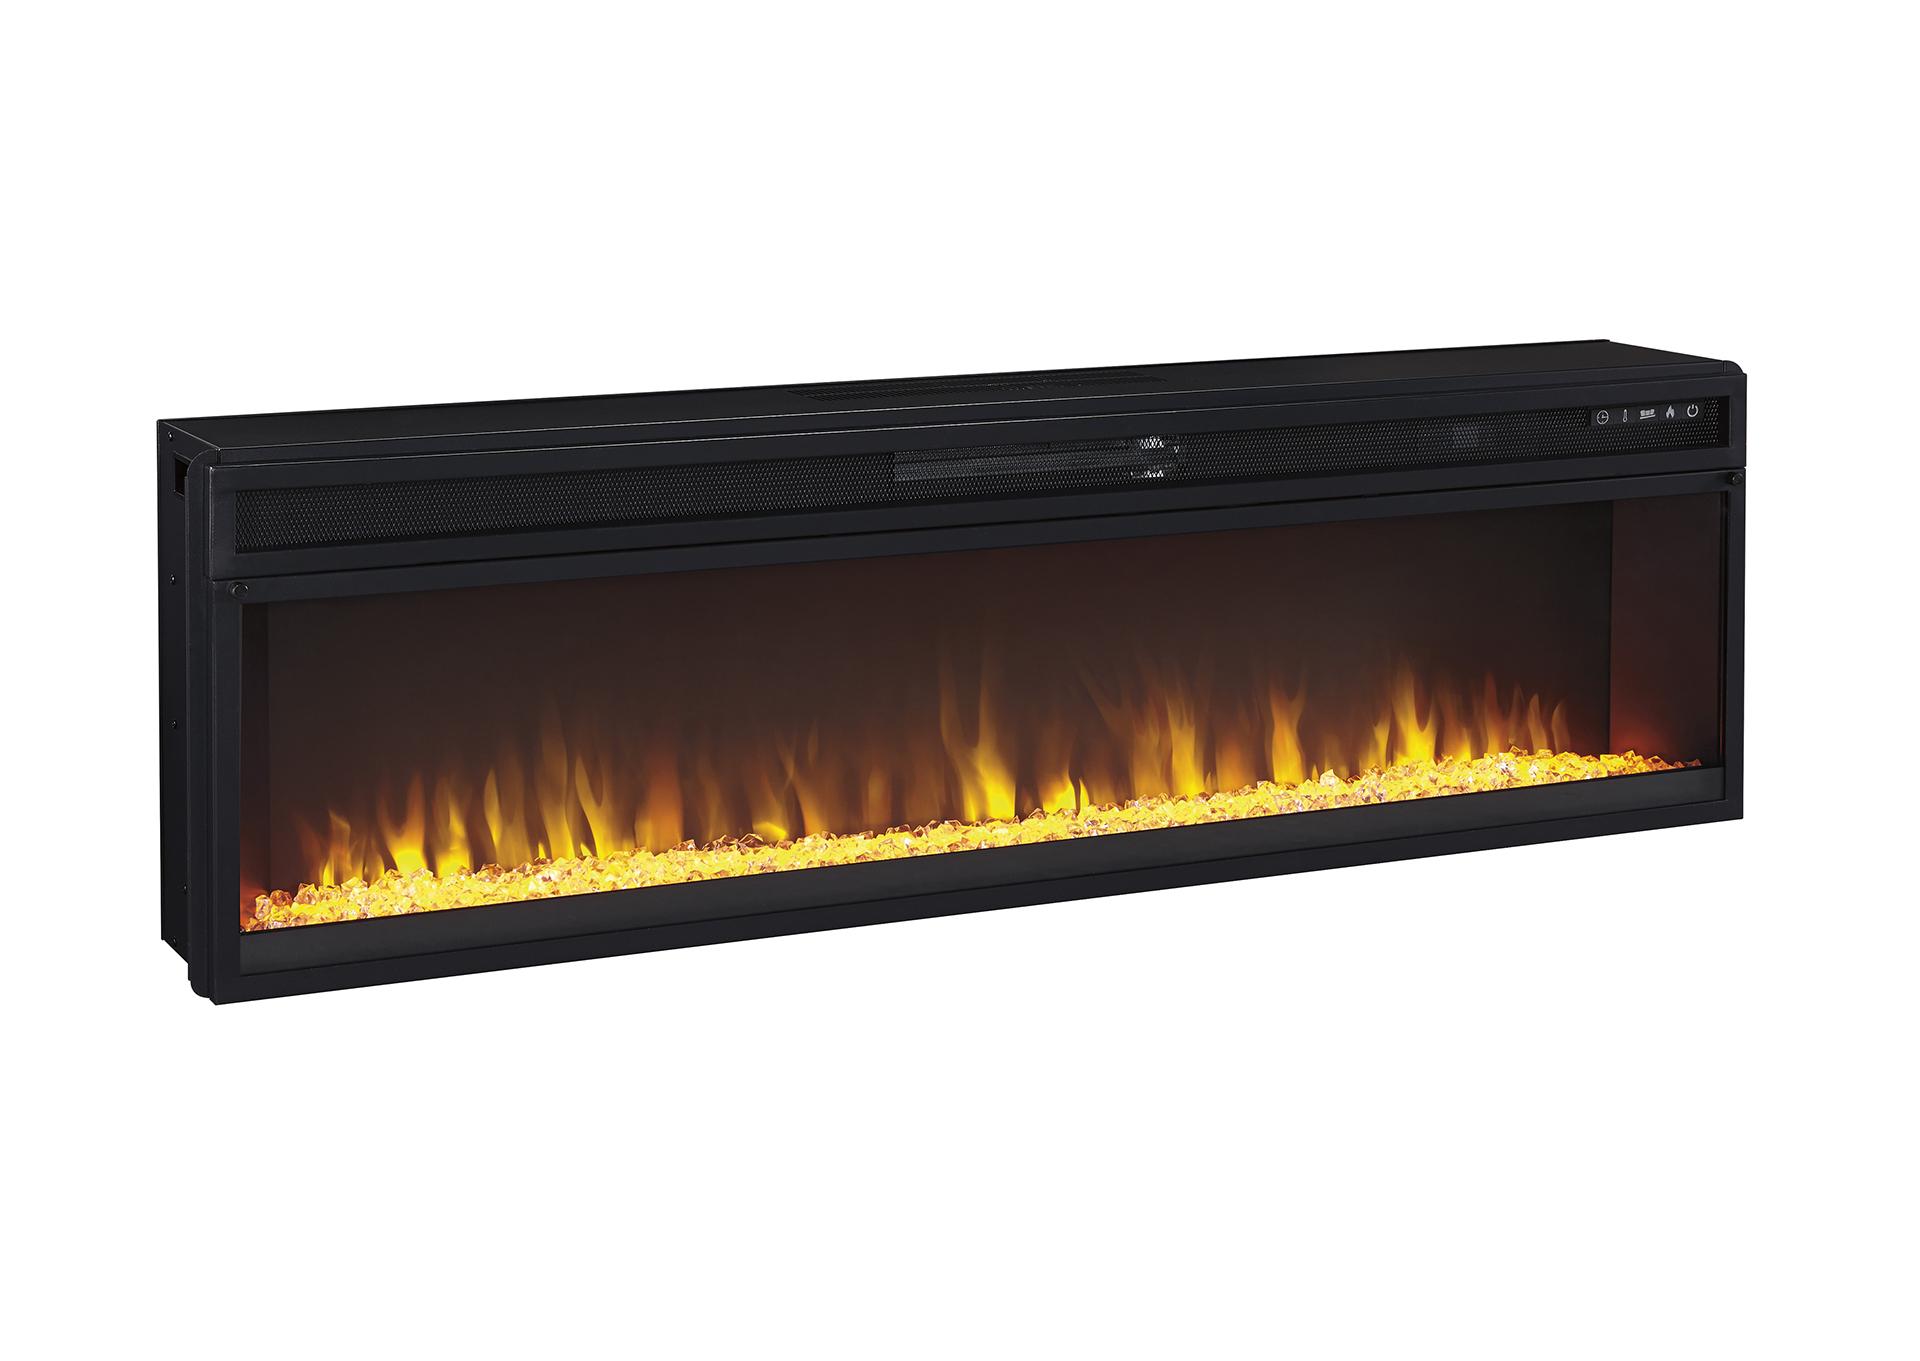 ENTERTAINMENT ACCESSORIES WIDE FIREPLACE INSERT,ASHLEY FURNITURE INC.